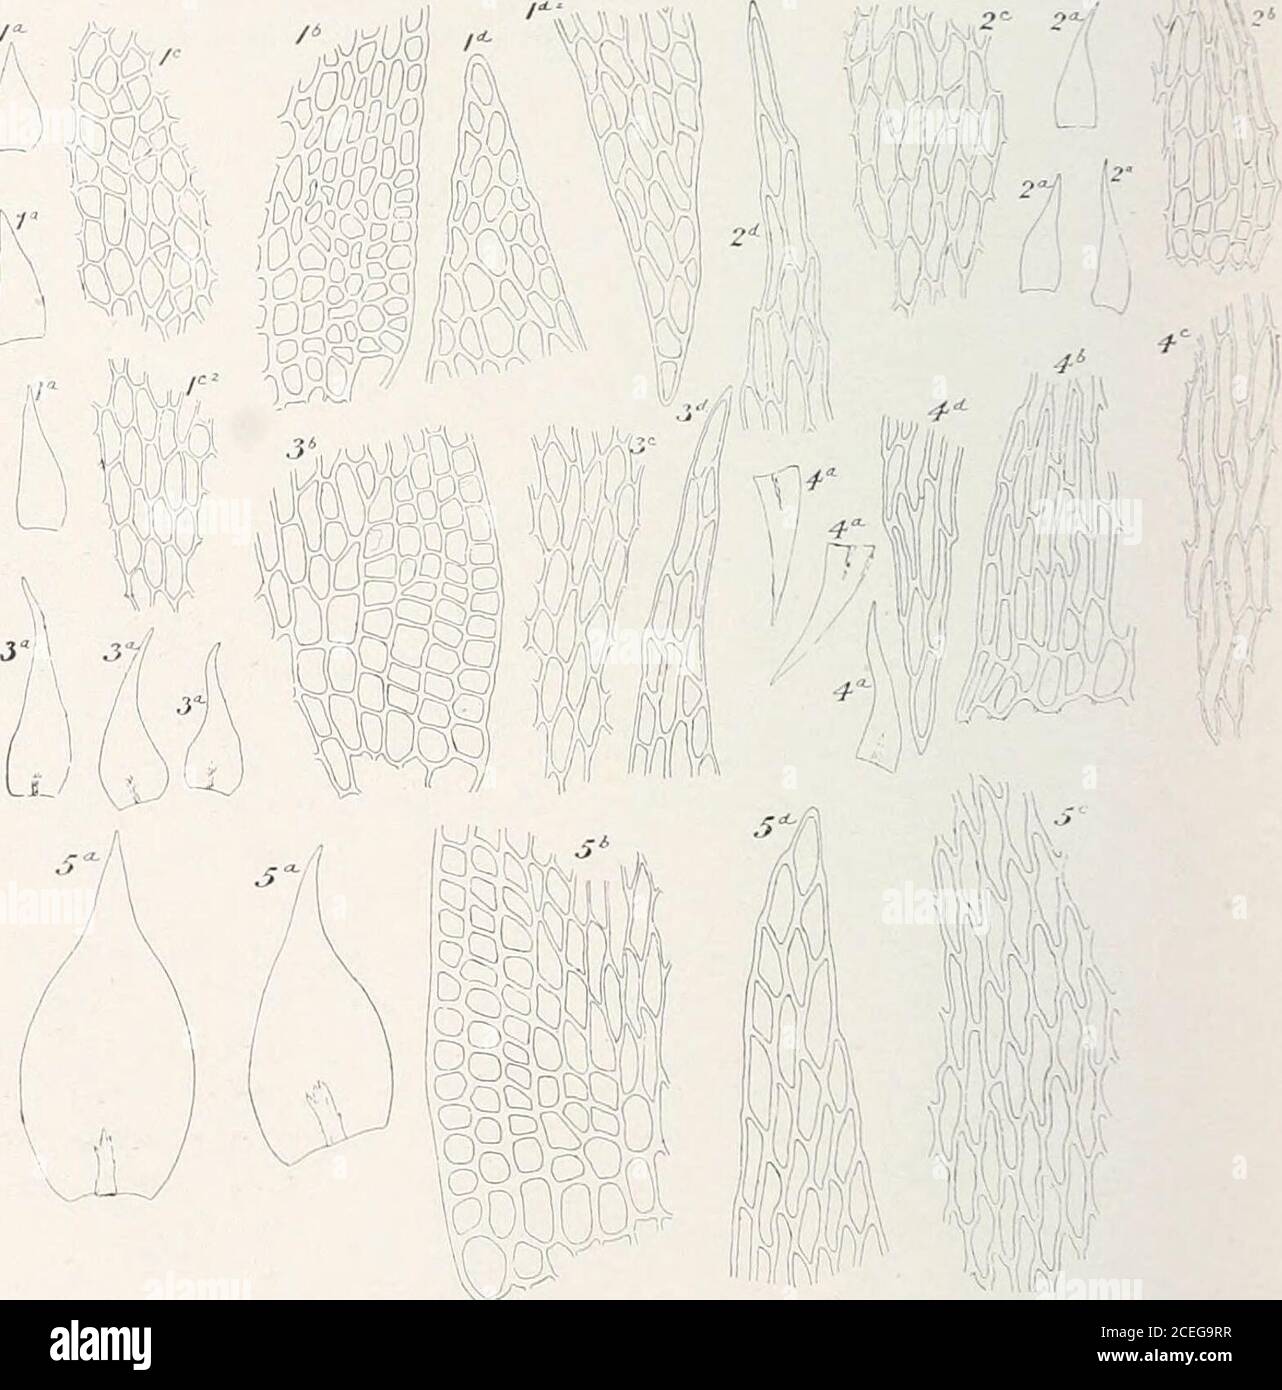 . Mosses with hand-lens and microscope : a non-technical hand-book of the more common mosses of the northeastern United States. ■u,/./,/r  FiGLiRt 201. Amblysleqie/la sublilis (From Bry. Eur.) 376 MOSSES WITH HAND-LENS AND MICROSCOPE A. subtilis (Hedw.) Loeske. Plants small, in thin closely woven dark-greenmats; leaves rather distant, lanceolate to linear-lanceolate, slenderly long-acuminate, narrowed to the insertion, not decurrent, entire, appressed when dry,0.25-0.6 long; costa short and faint or lacking; median cells oblong-hex-agonal, 2-3:1 ; alar cells quadrate to transversely elongated Stock Photo